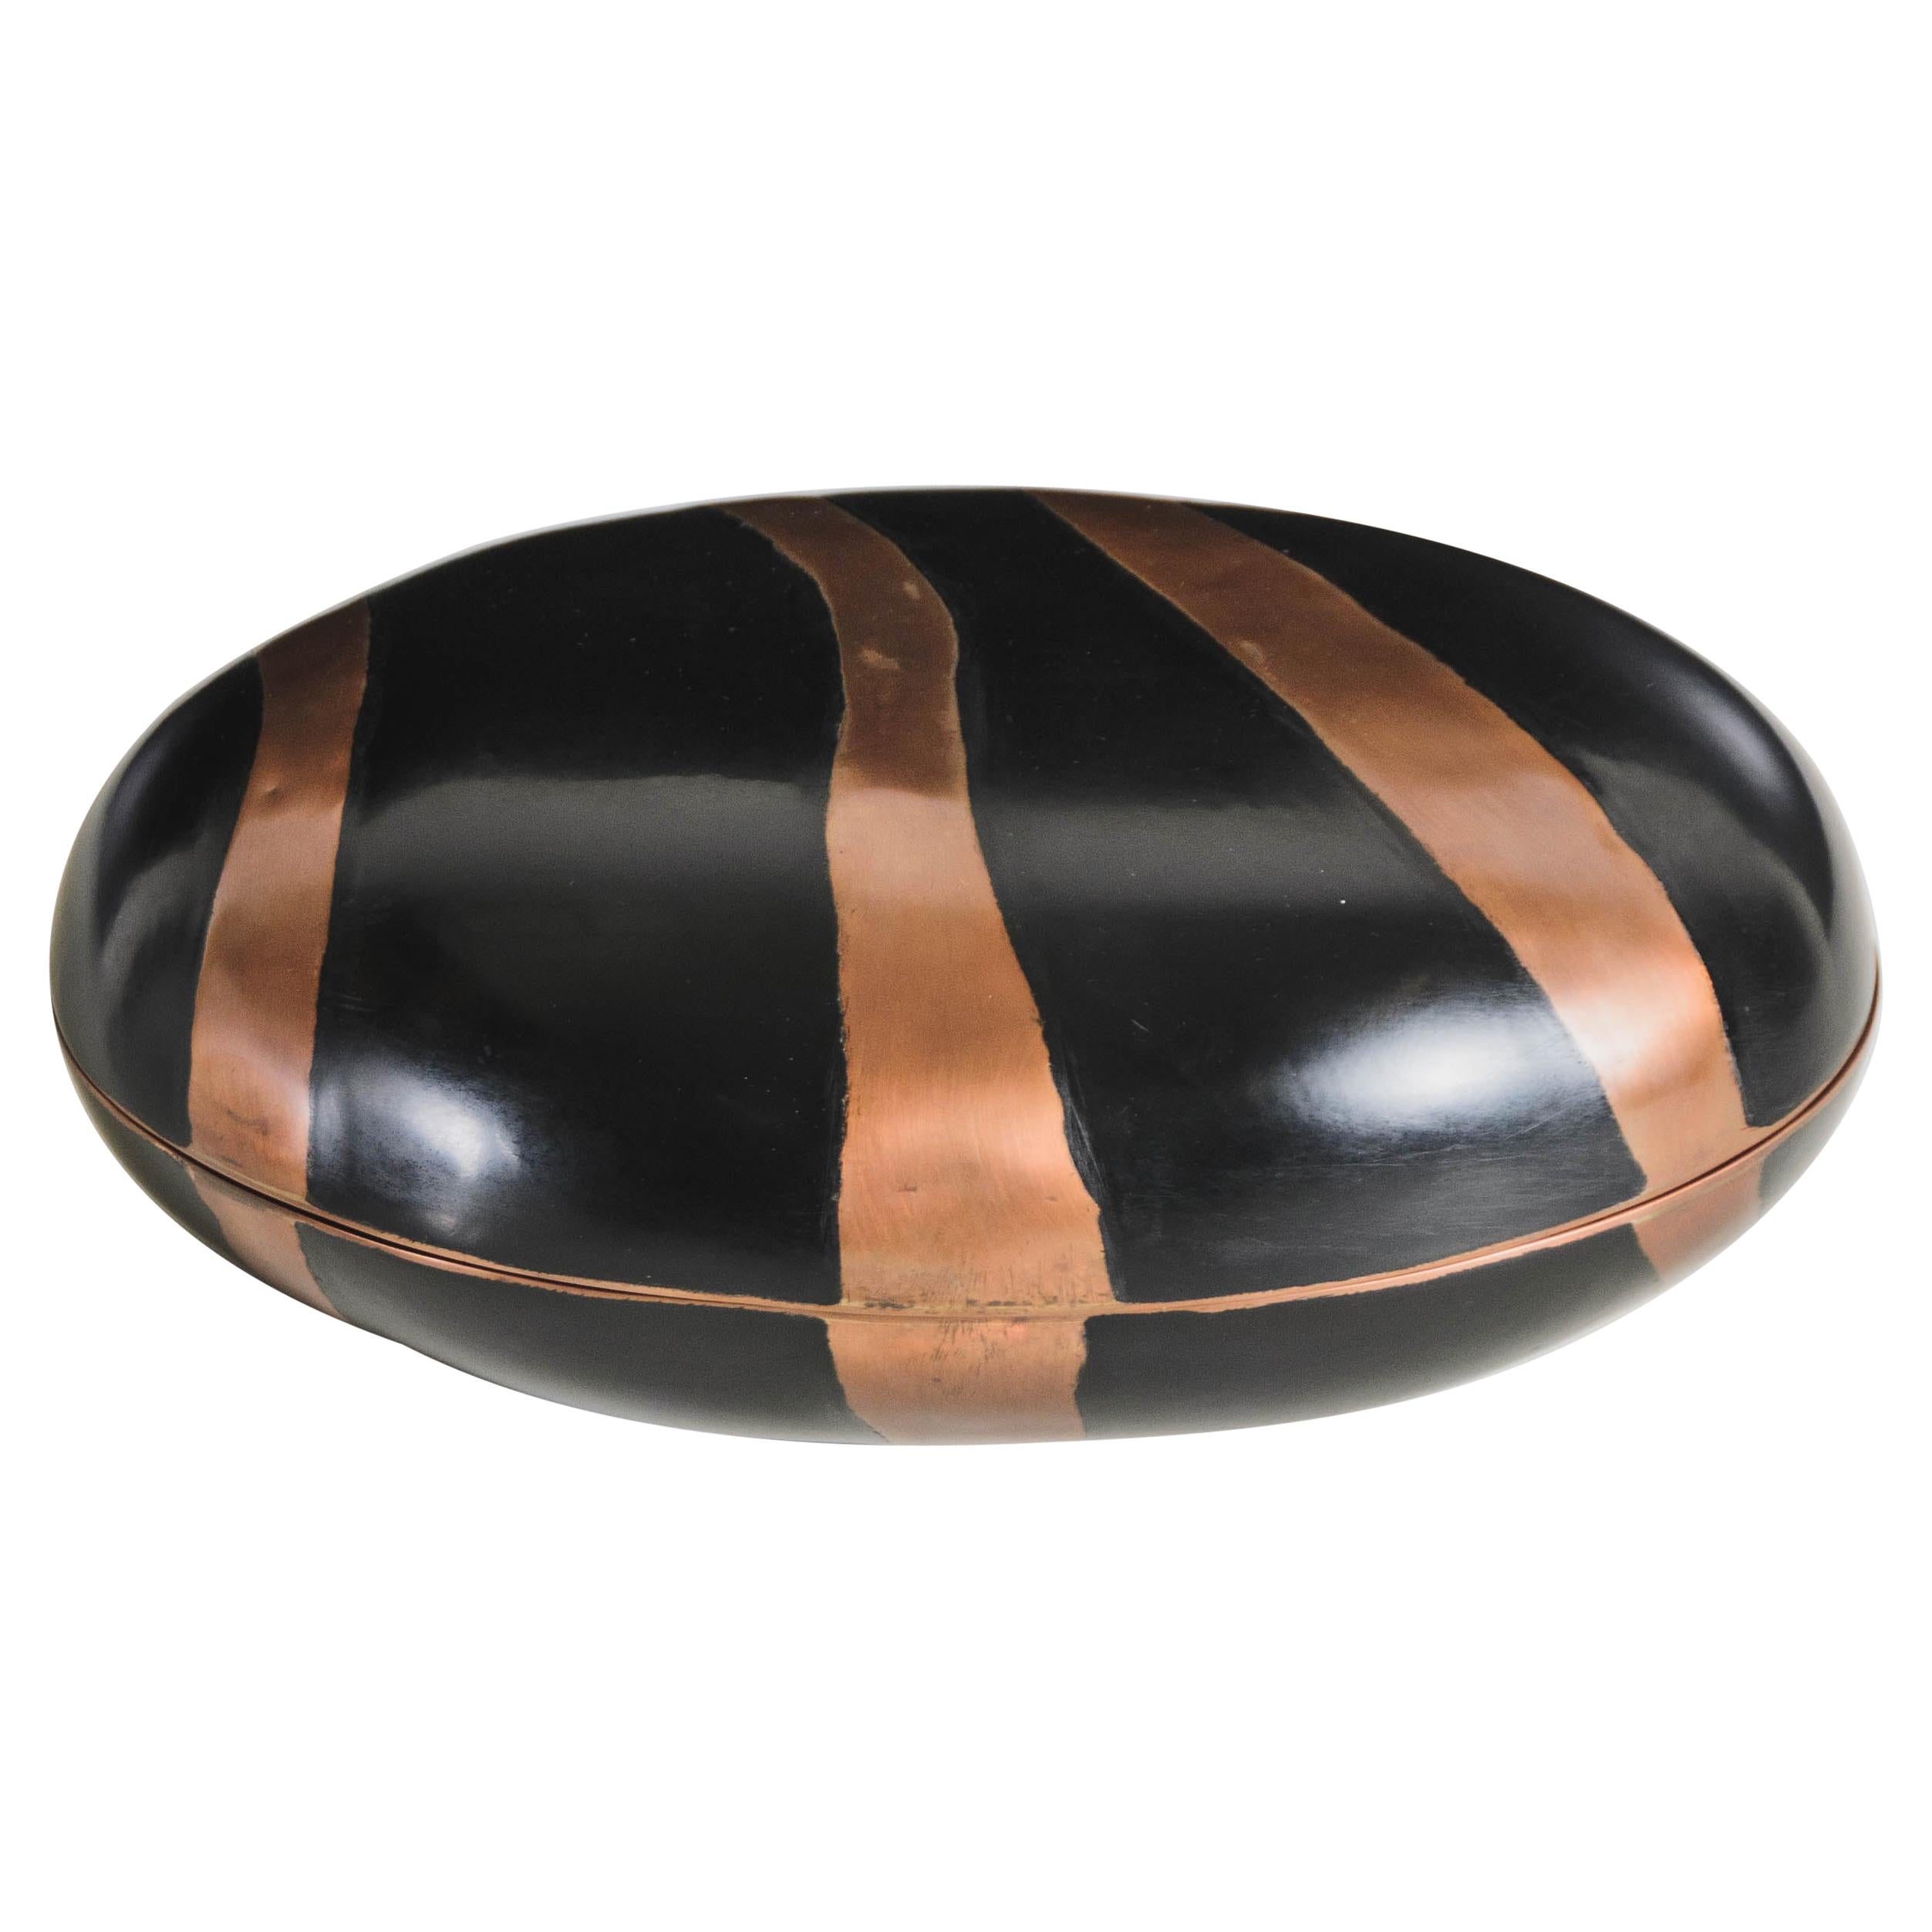 Zebra Box in Black Lacquer and Copper by Robert Kuo, Hand Repoussé, Limited For Sale